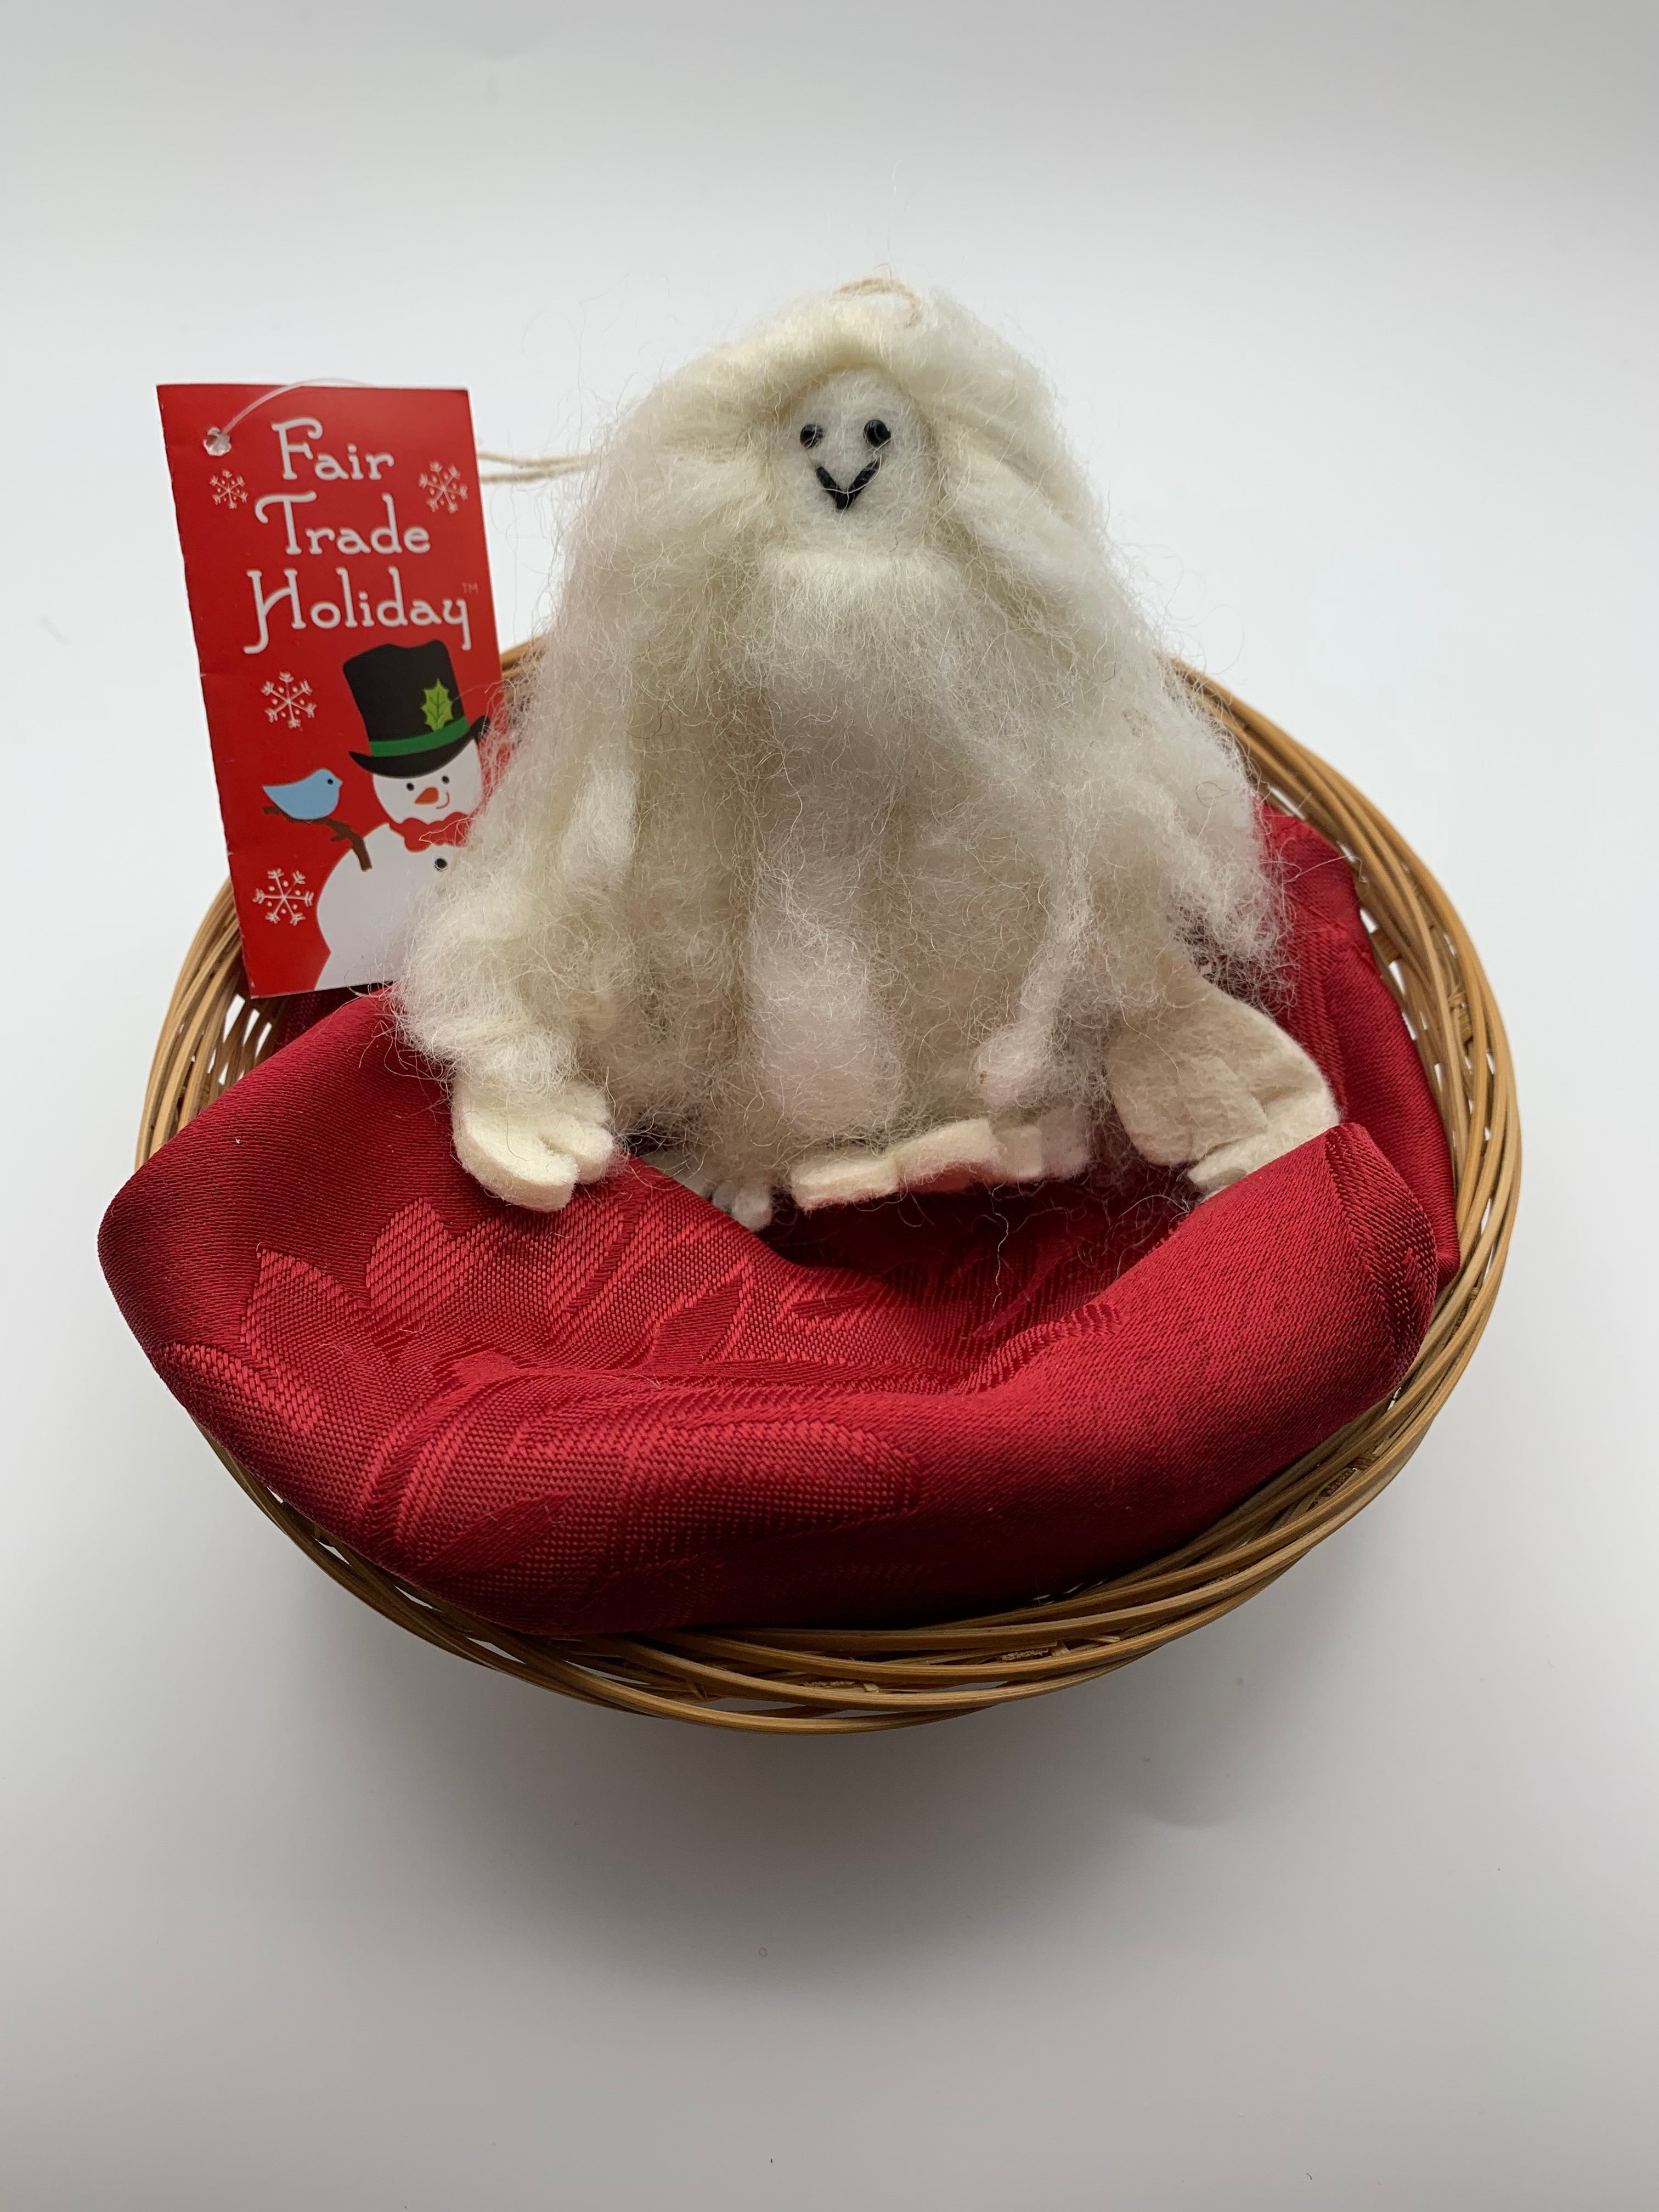 This is a Yeti Christmas Ornament that is handcrafted (fair trade) and made of 100% natural wool.  He is off-white and furry with felted hands and feet and black accents (mouth/eyes). Approximately 4.5"x3.5". He comes with a fair trade holiday "to/from" tag to use if you are giving this as a gift.